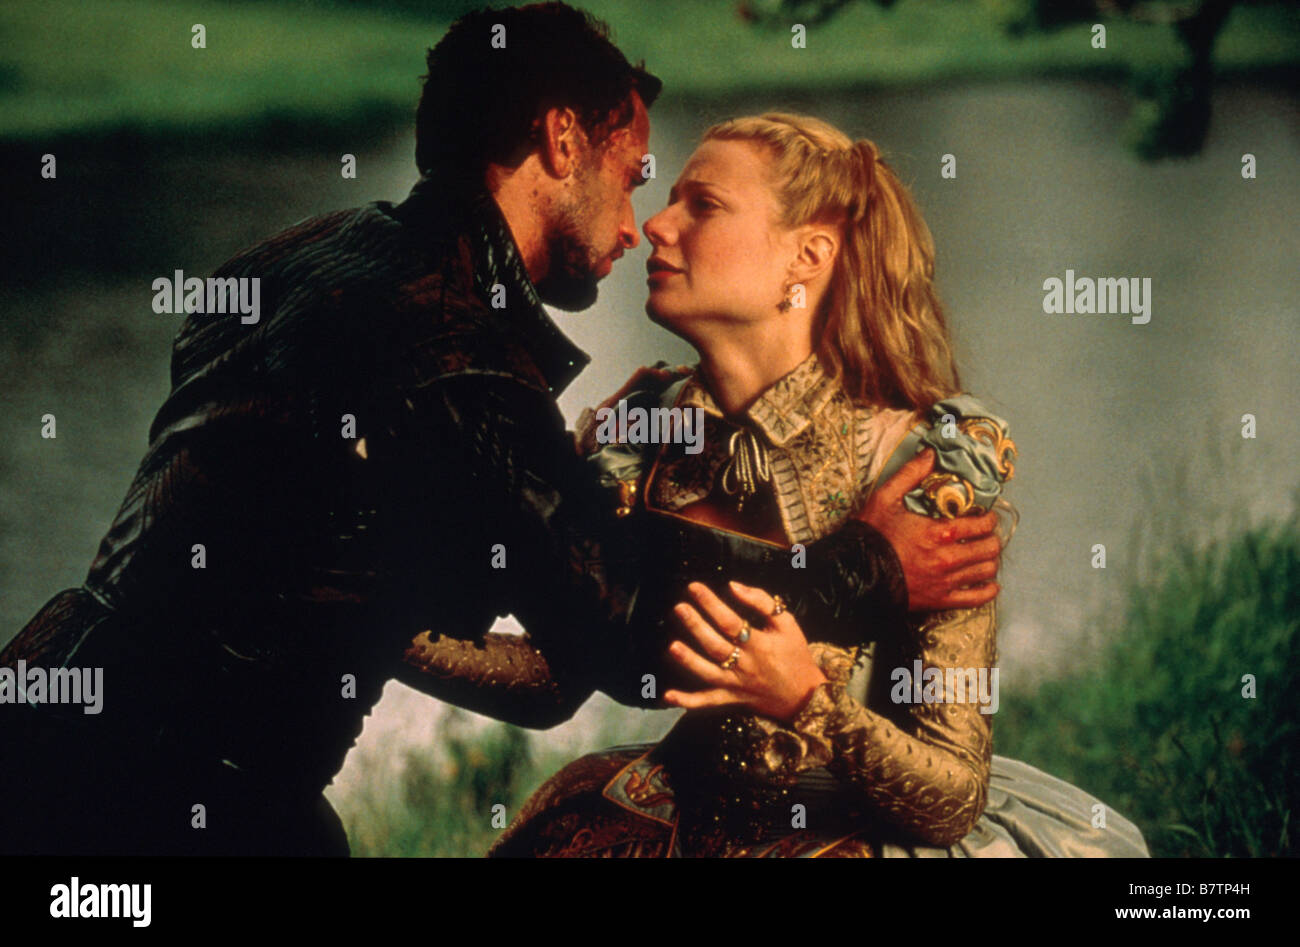 Shakespeare in Love Année : 1998 USA Gwyneth Paltrow, Colin Firth Réalisateur : John Madden Banque D'Images